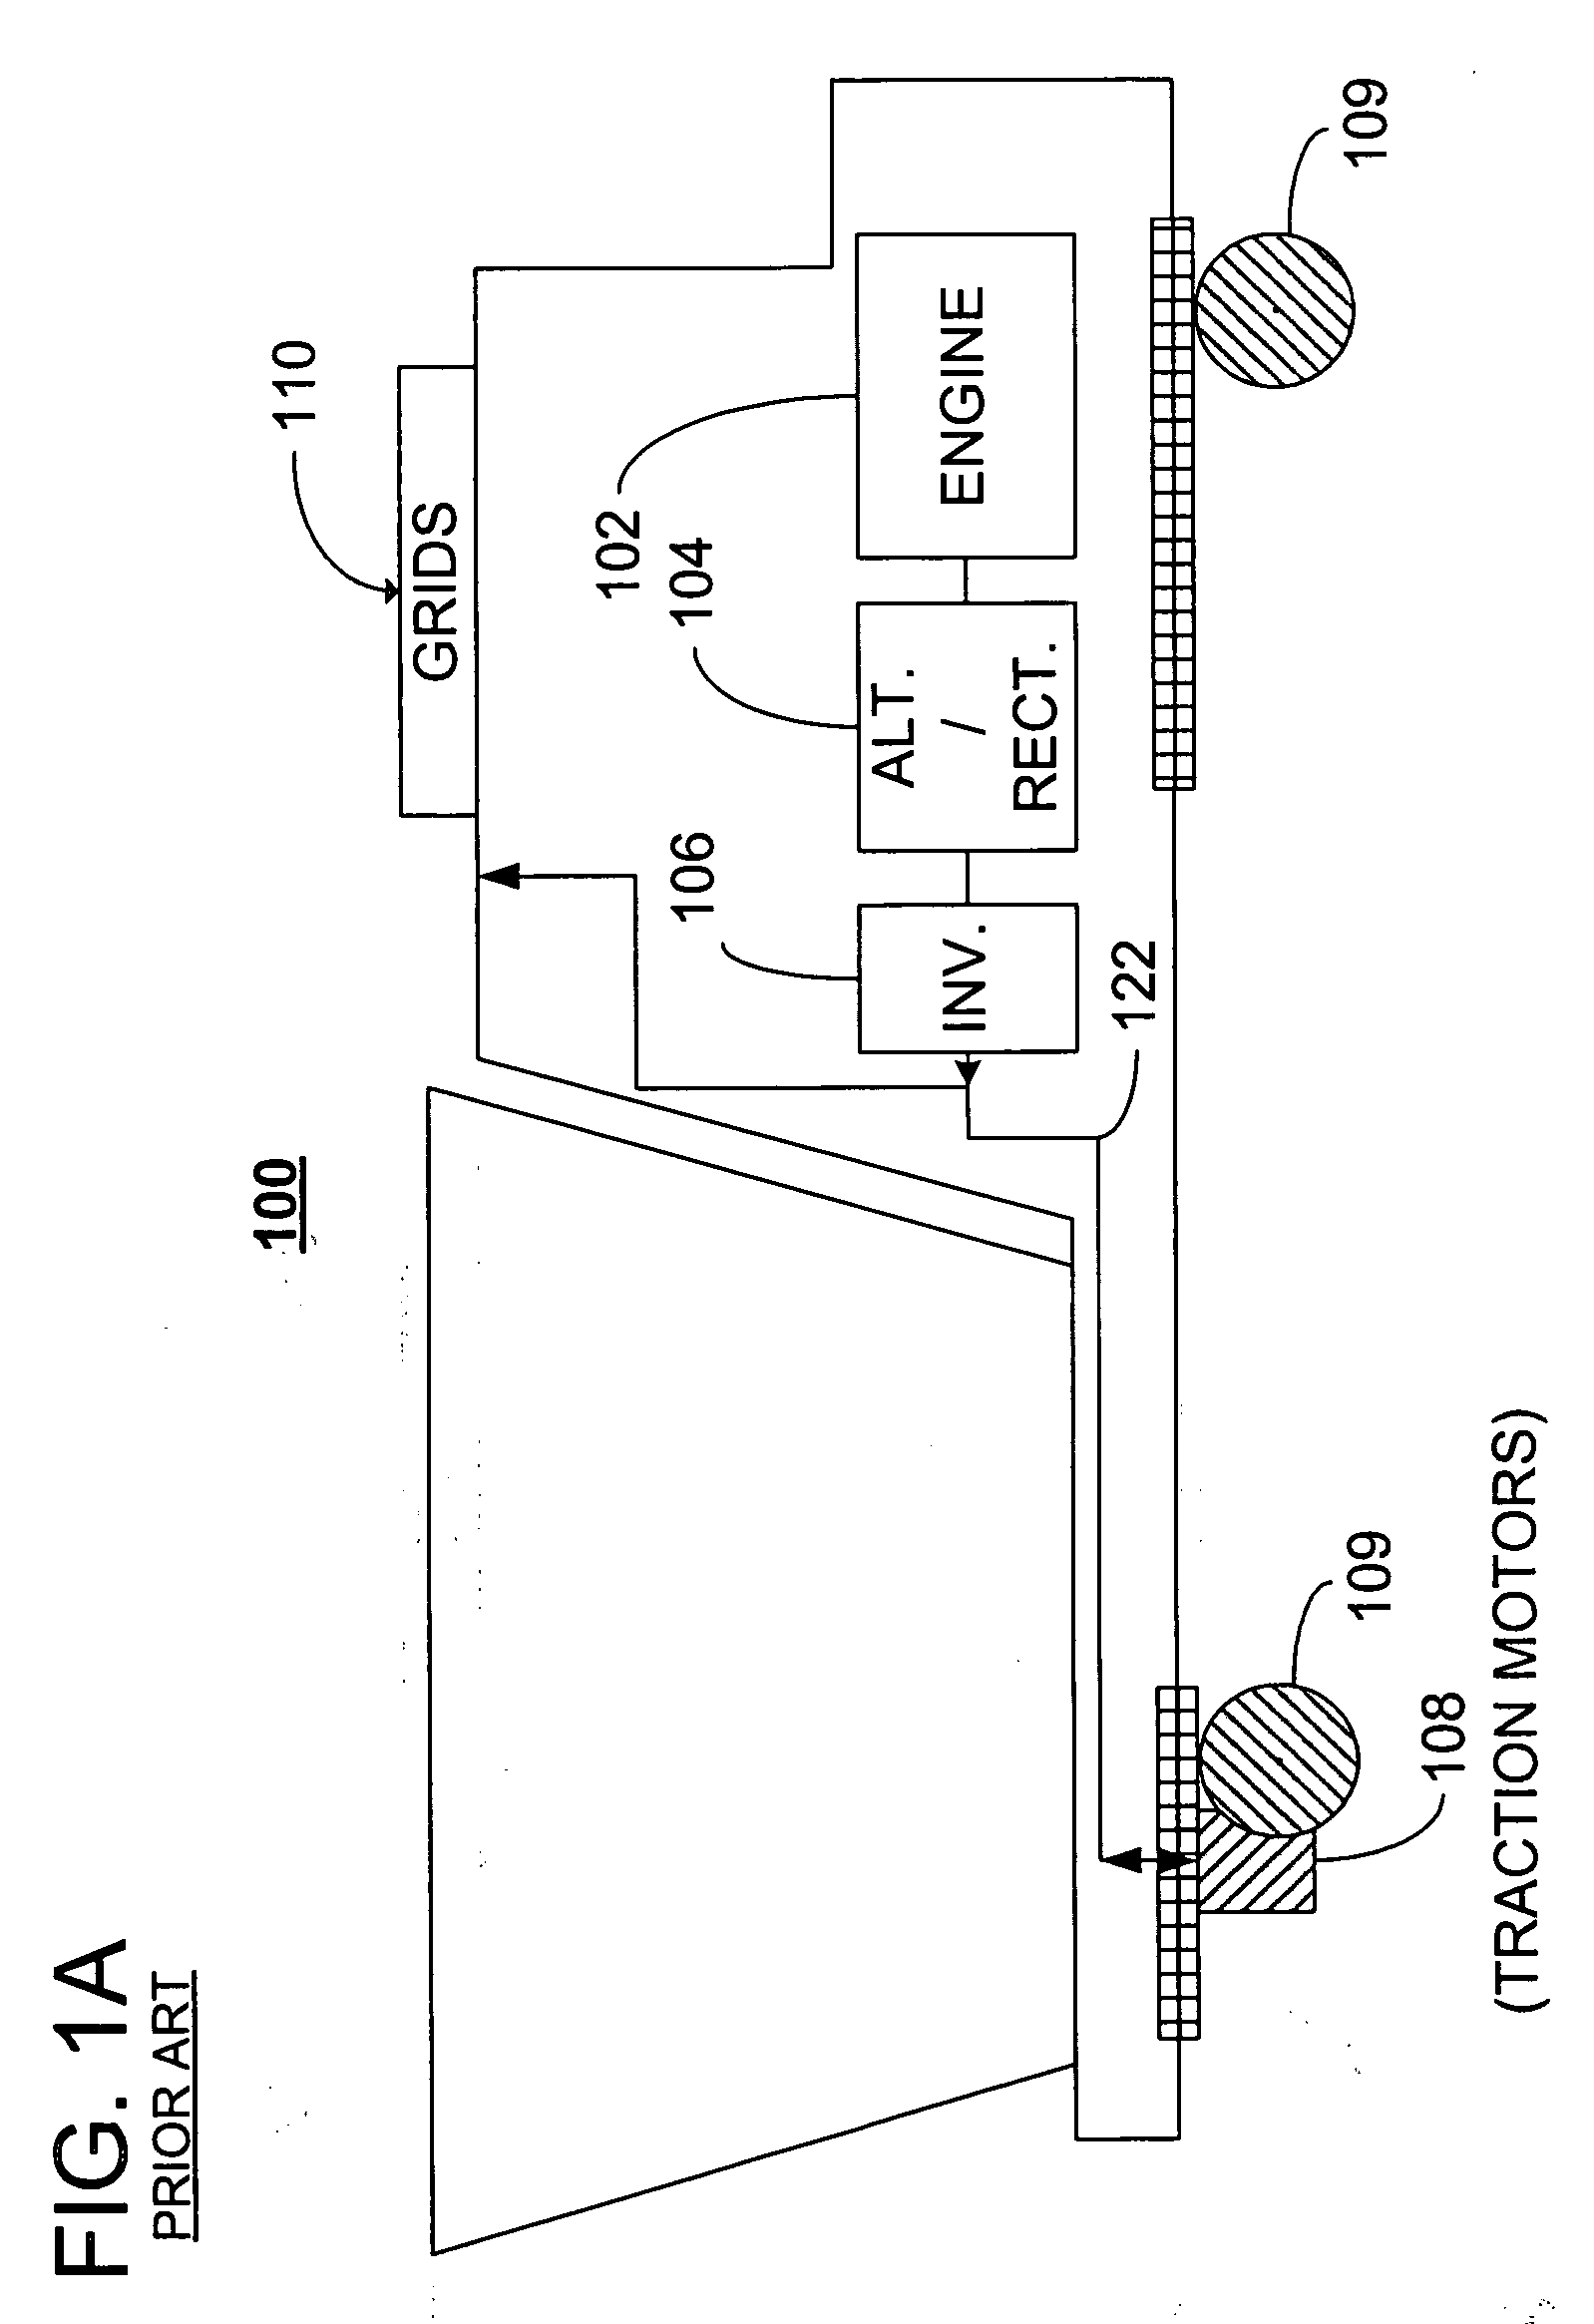 Hybrid energy off highway vehicle electric power management system and method